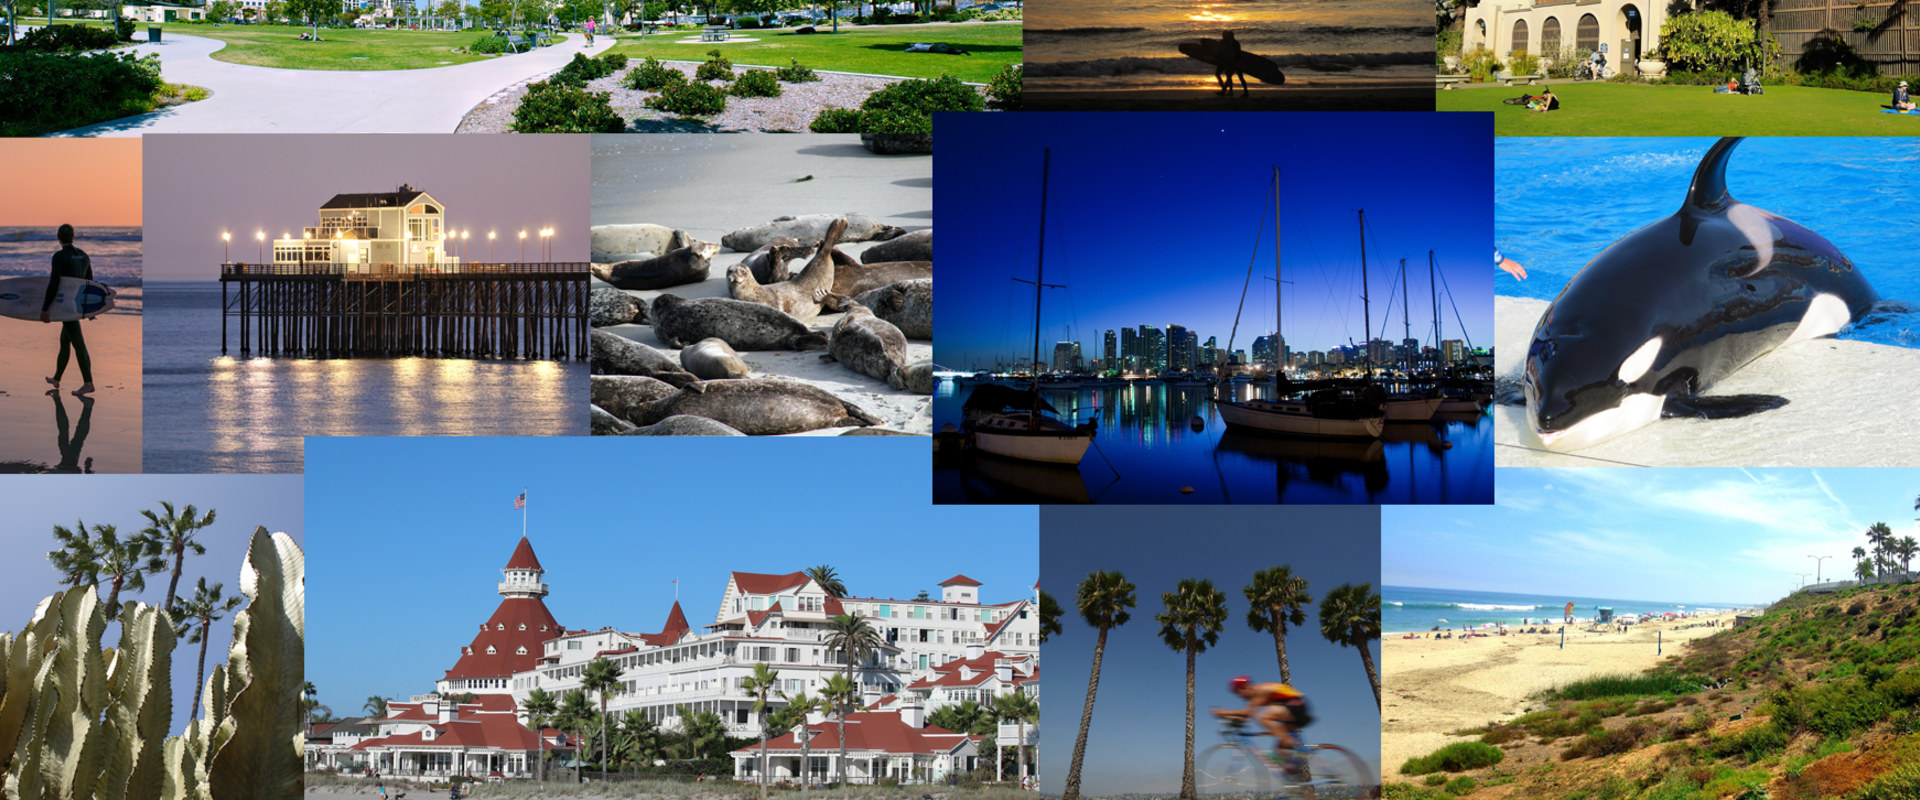 Is san diego the nicest city?